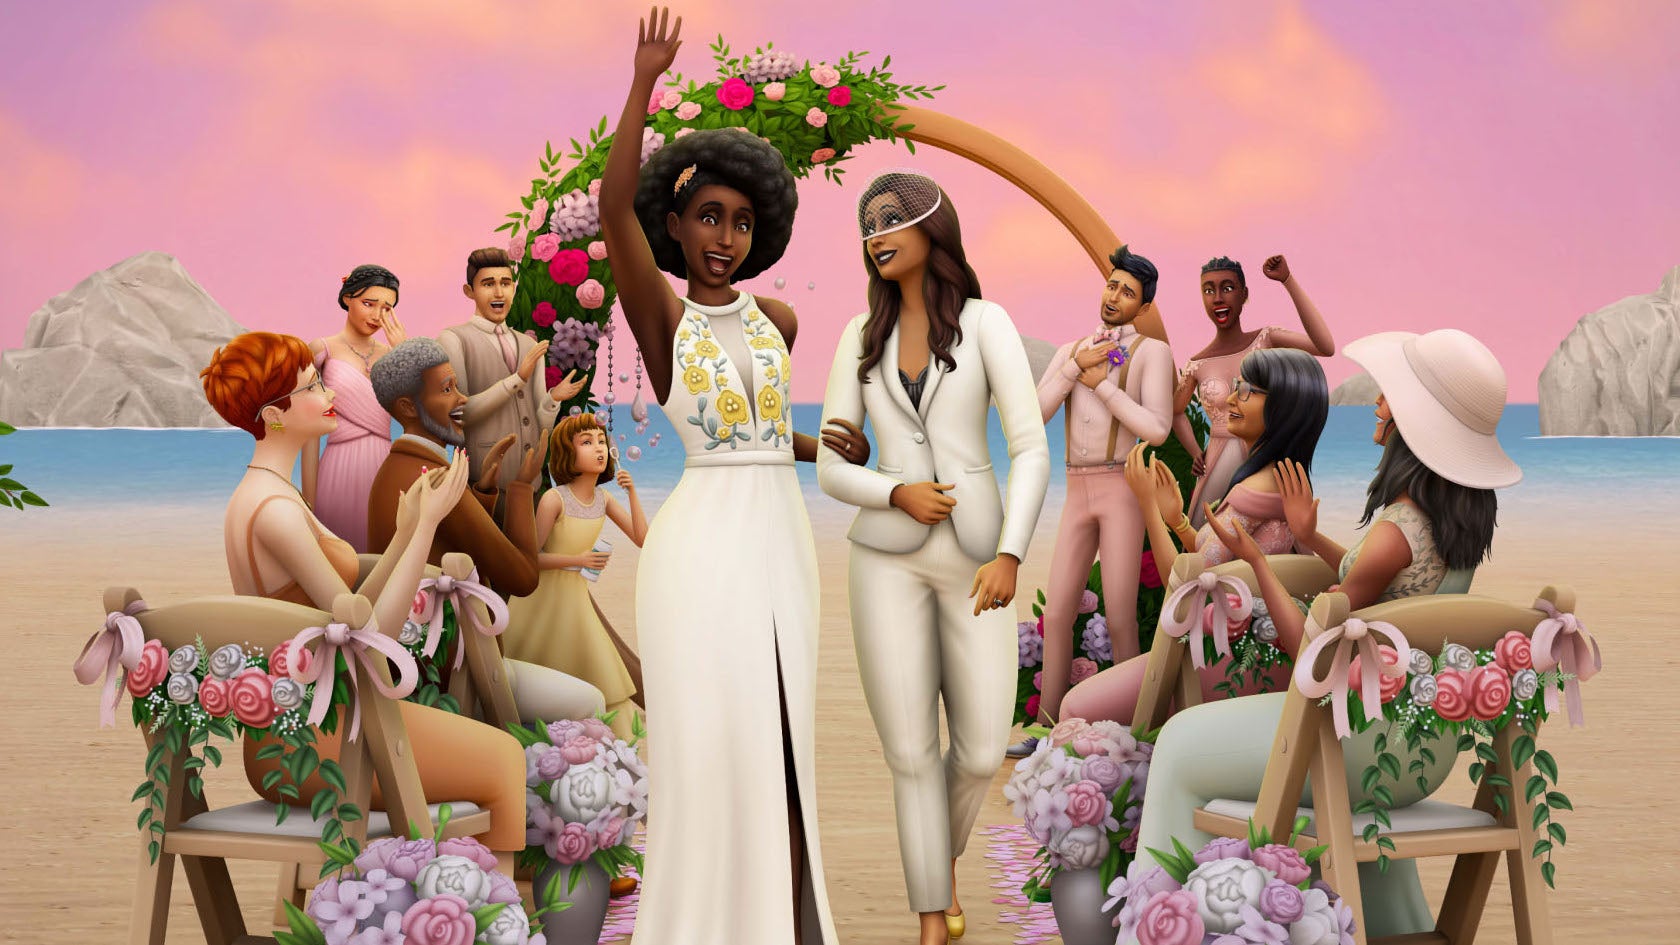 A sapphic Sims beach wedding in The Sims 4: My Wedding Stories promotional artwork.